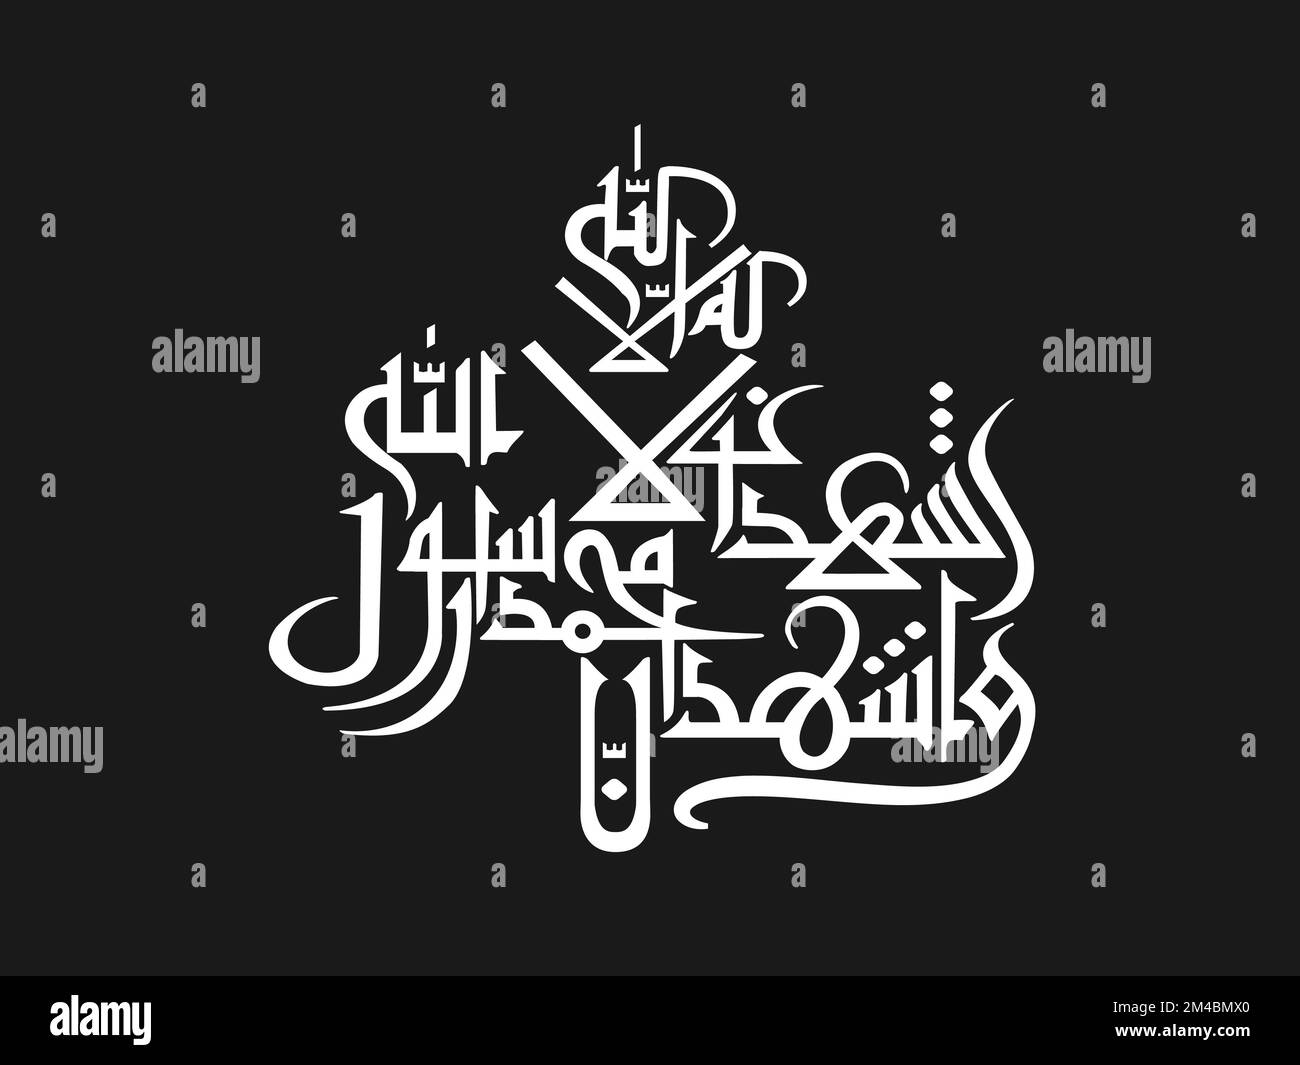 Arabic Calligraphy of first kalma. Muslims. Shahada Kalma. 1st kalma-Shahada 'La Ilaha Ill Allah'. 'La Ilaha Ill Allah' means: There is no God but All Stock Photo